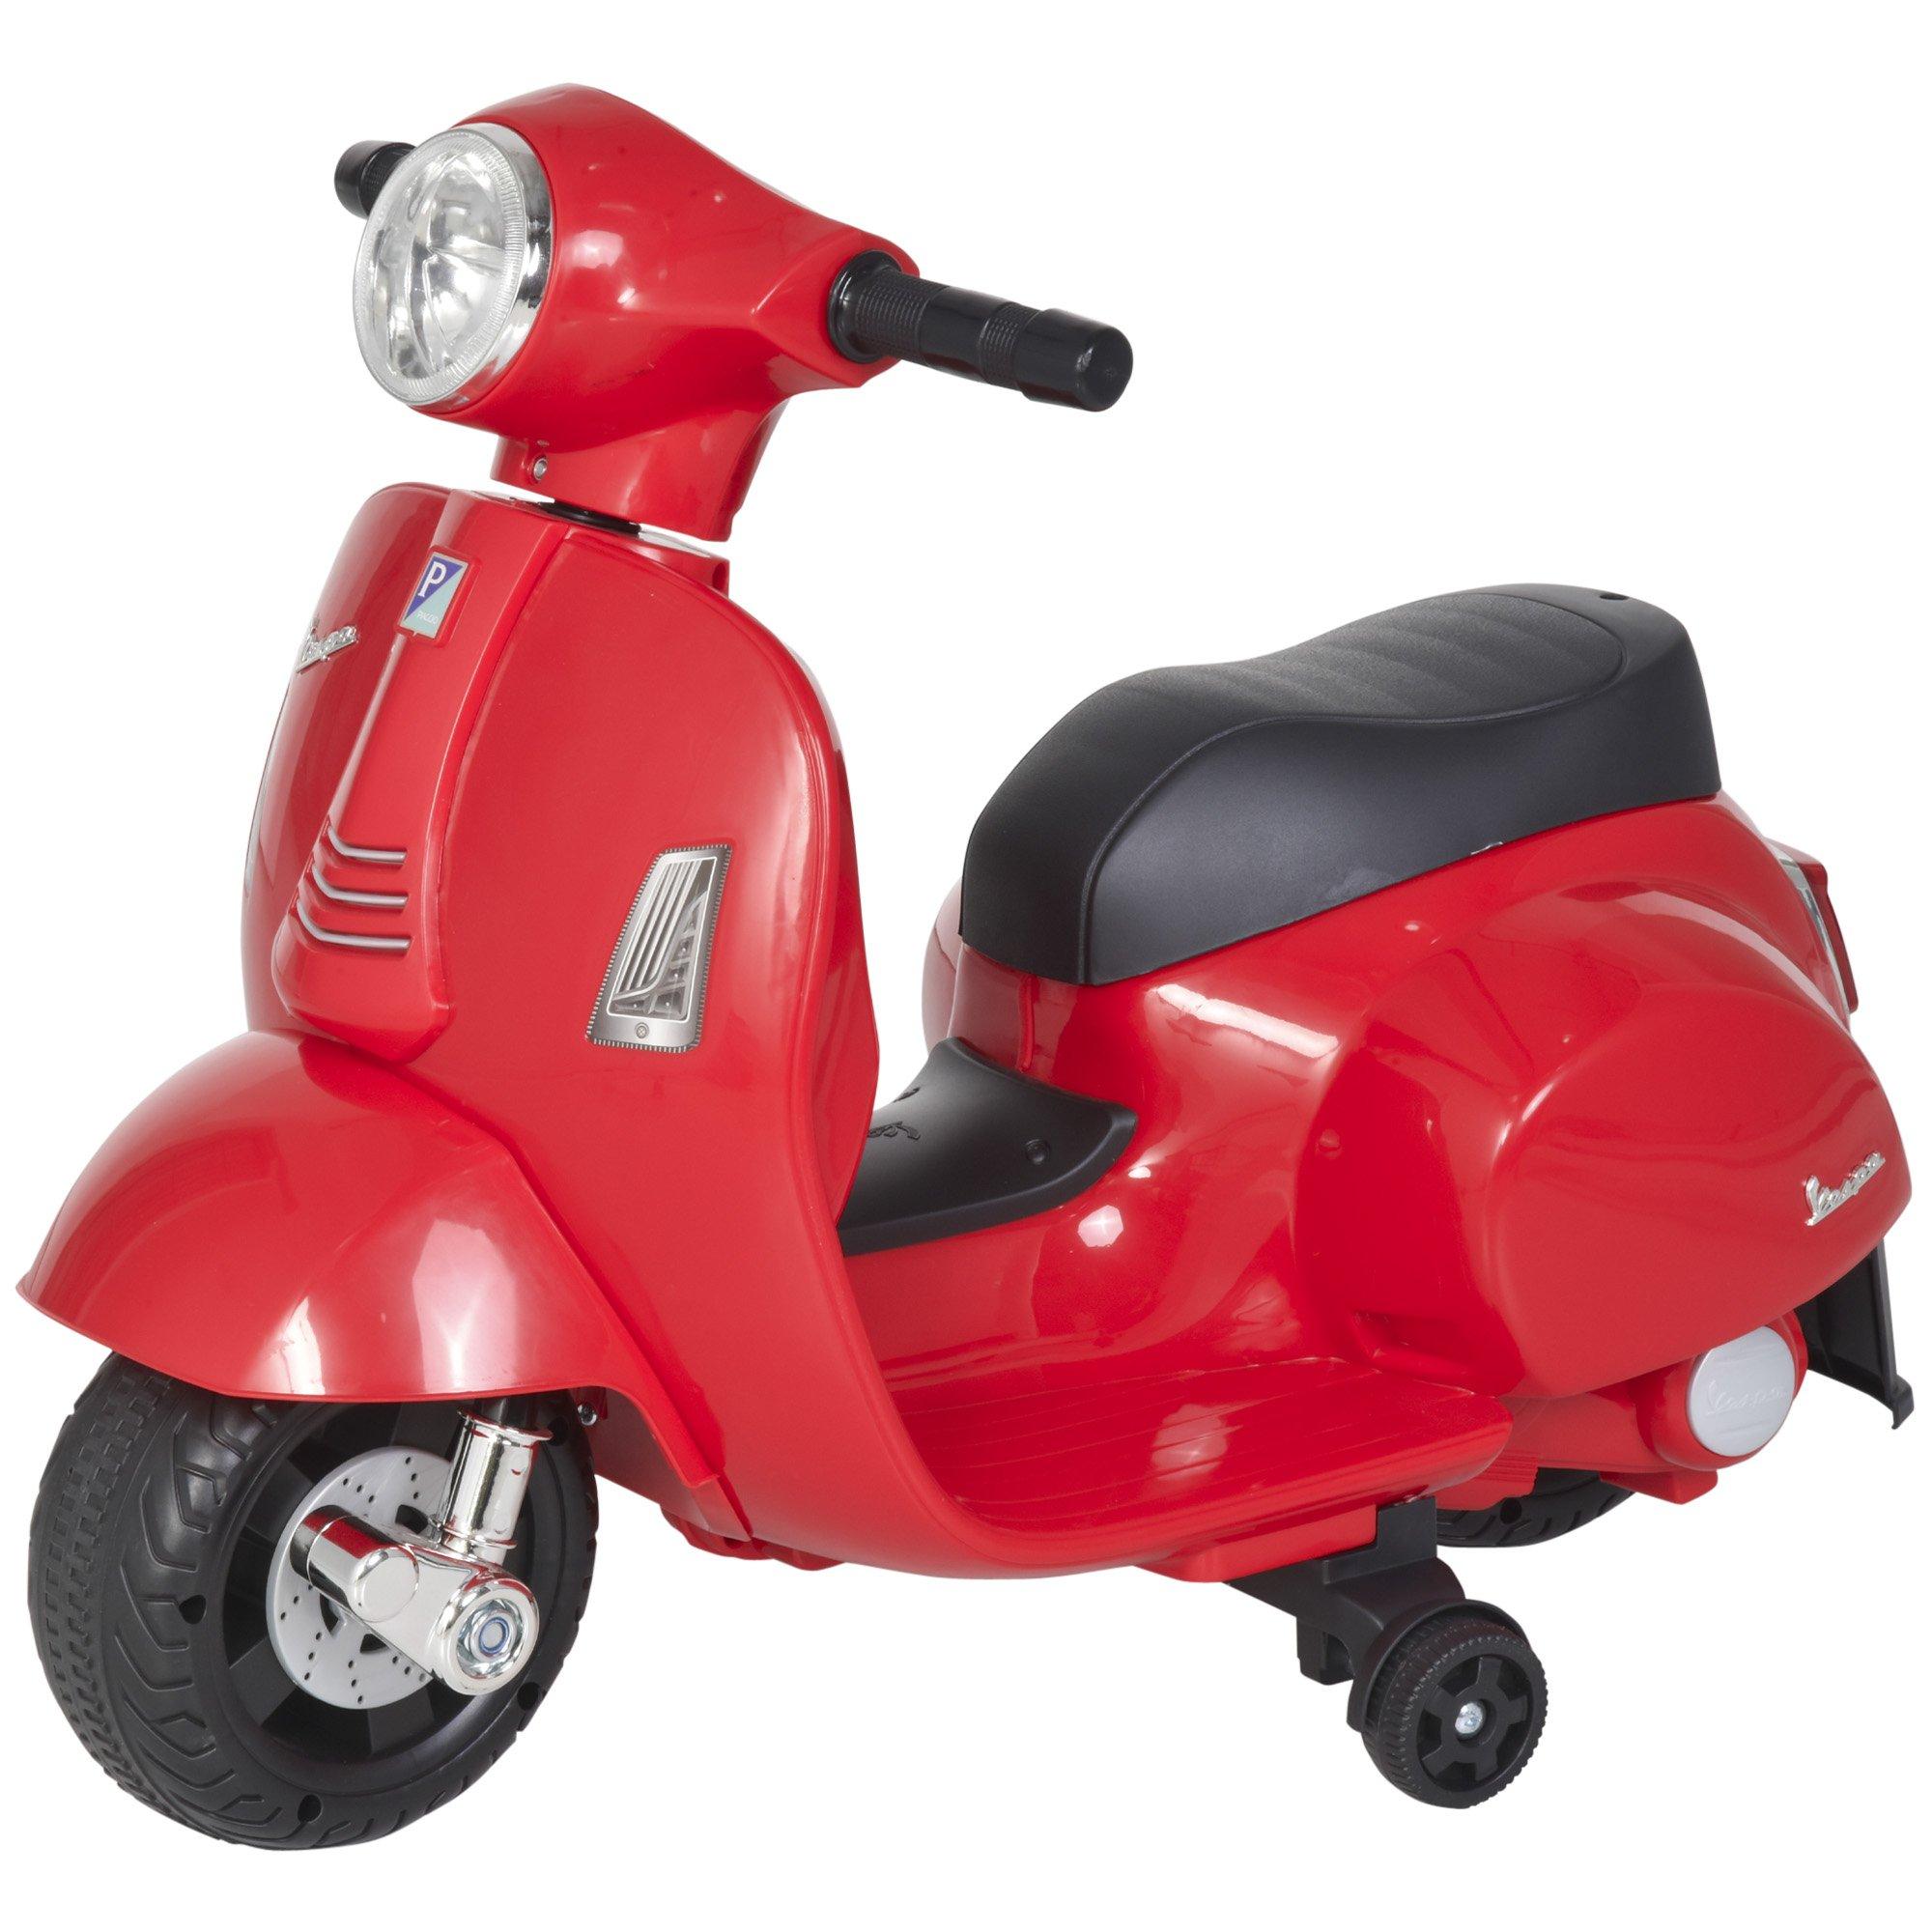 Vespa Licensed Kids Ride On Motorcycle 6V Battery Powered Toys